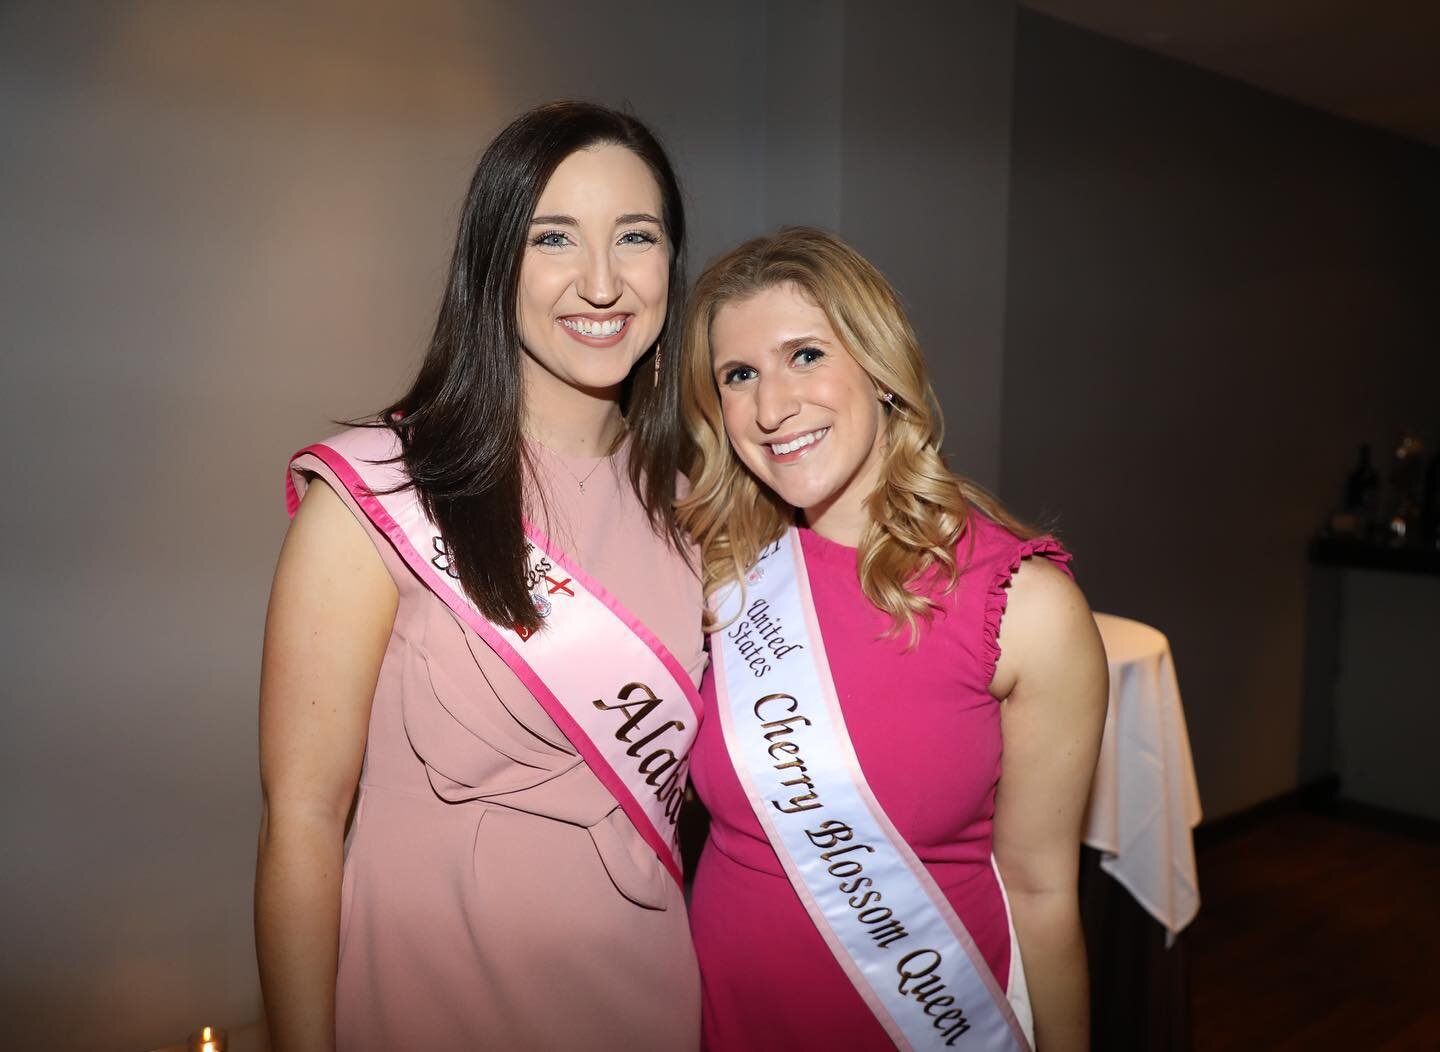 We had a great time celebrating our Cherry Blossom Princess, Lindsey Yerby, last night! She&rsquo;ll be a fantastic representative of our State and our organization during the national Cherry Blossom Princess Program in April. We&rsquo;re so excited 